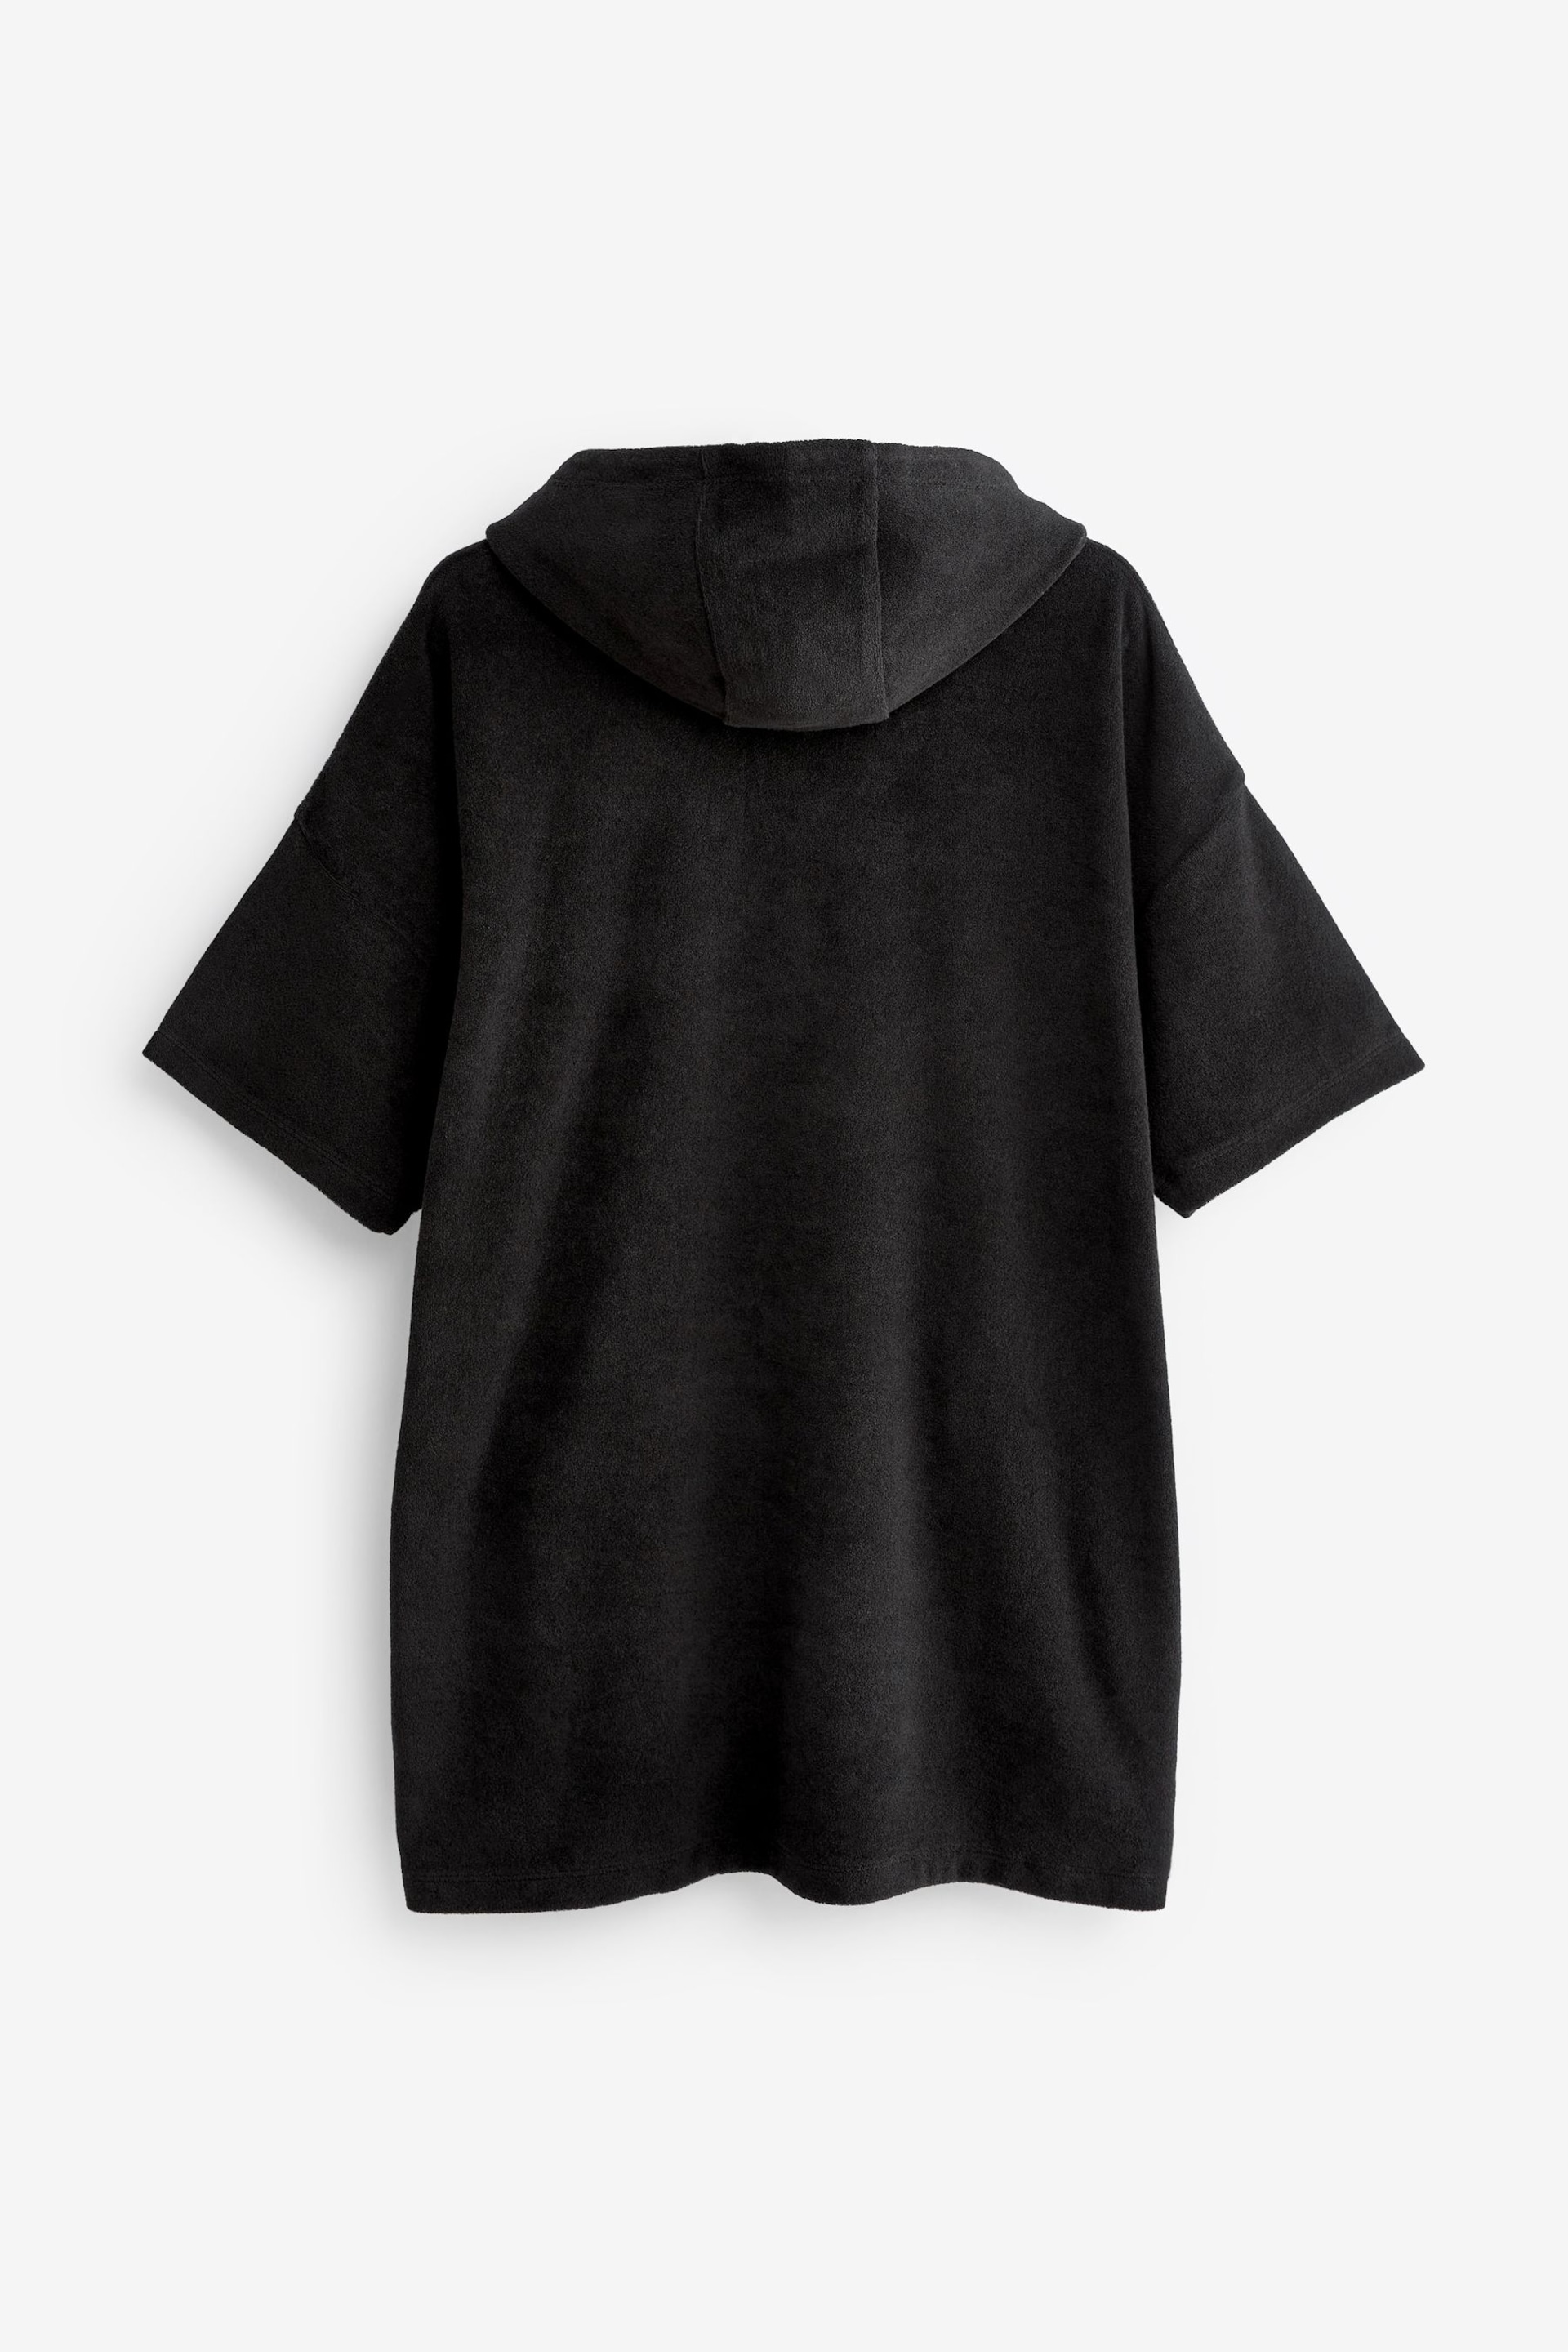 Black Oversized Hooded Towelling Cover-Up - Image 7 of 7